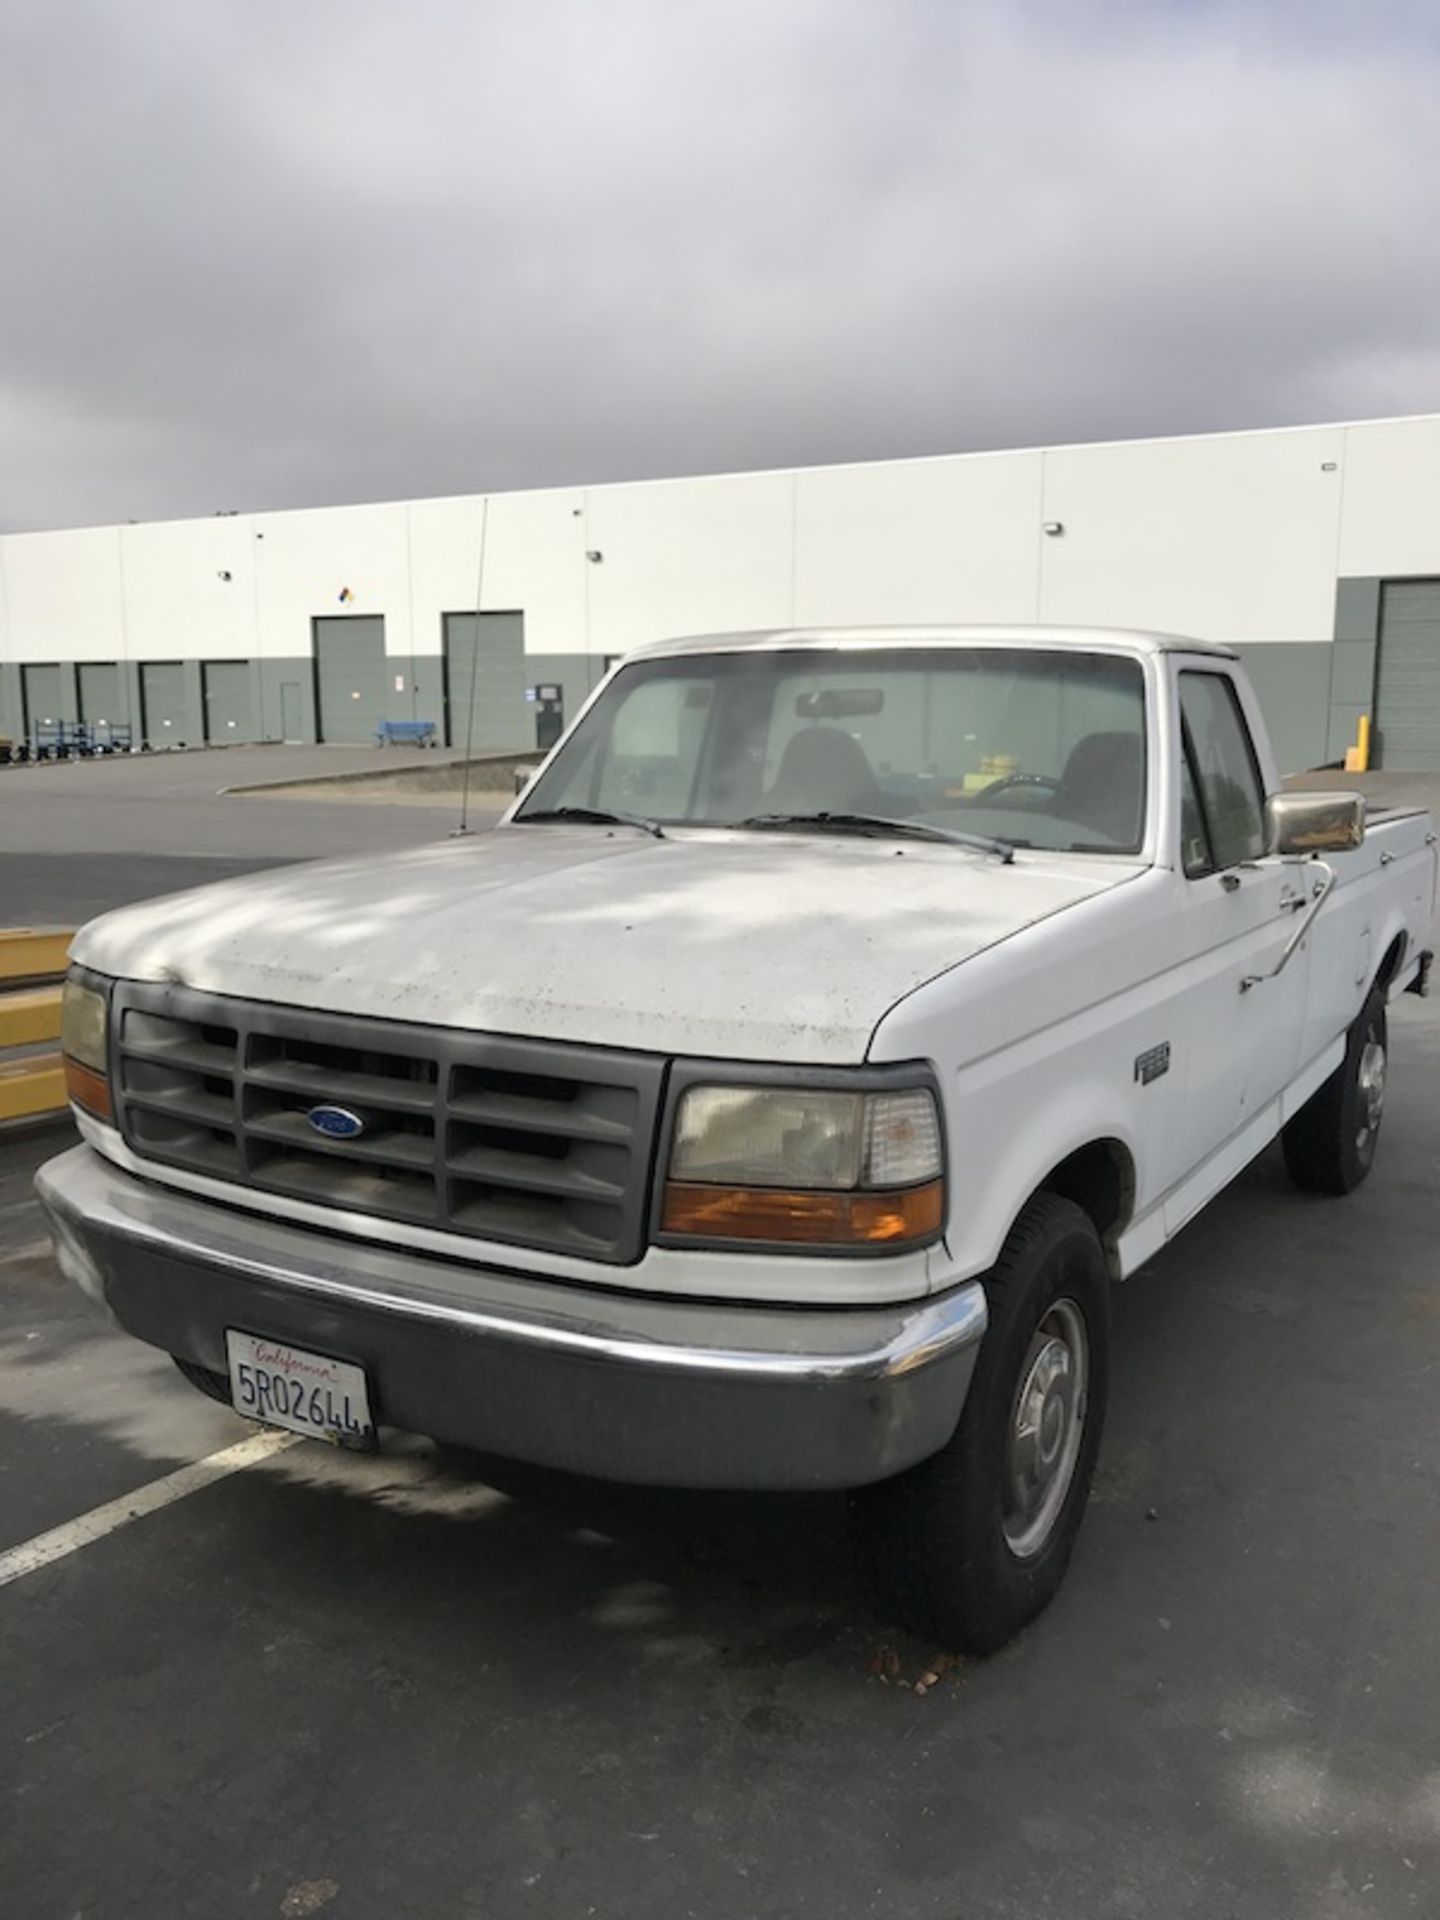 1997 Ford F250, VIN: 3FTHF25G1VMA59758 (No Title - Sold Bill OF Sale Only) - Image 2 of 12